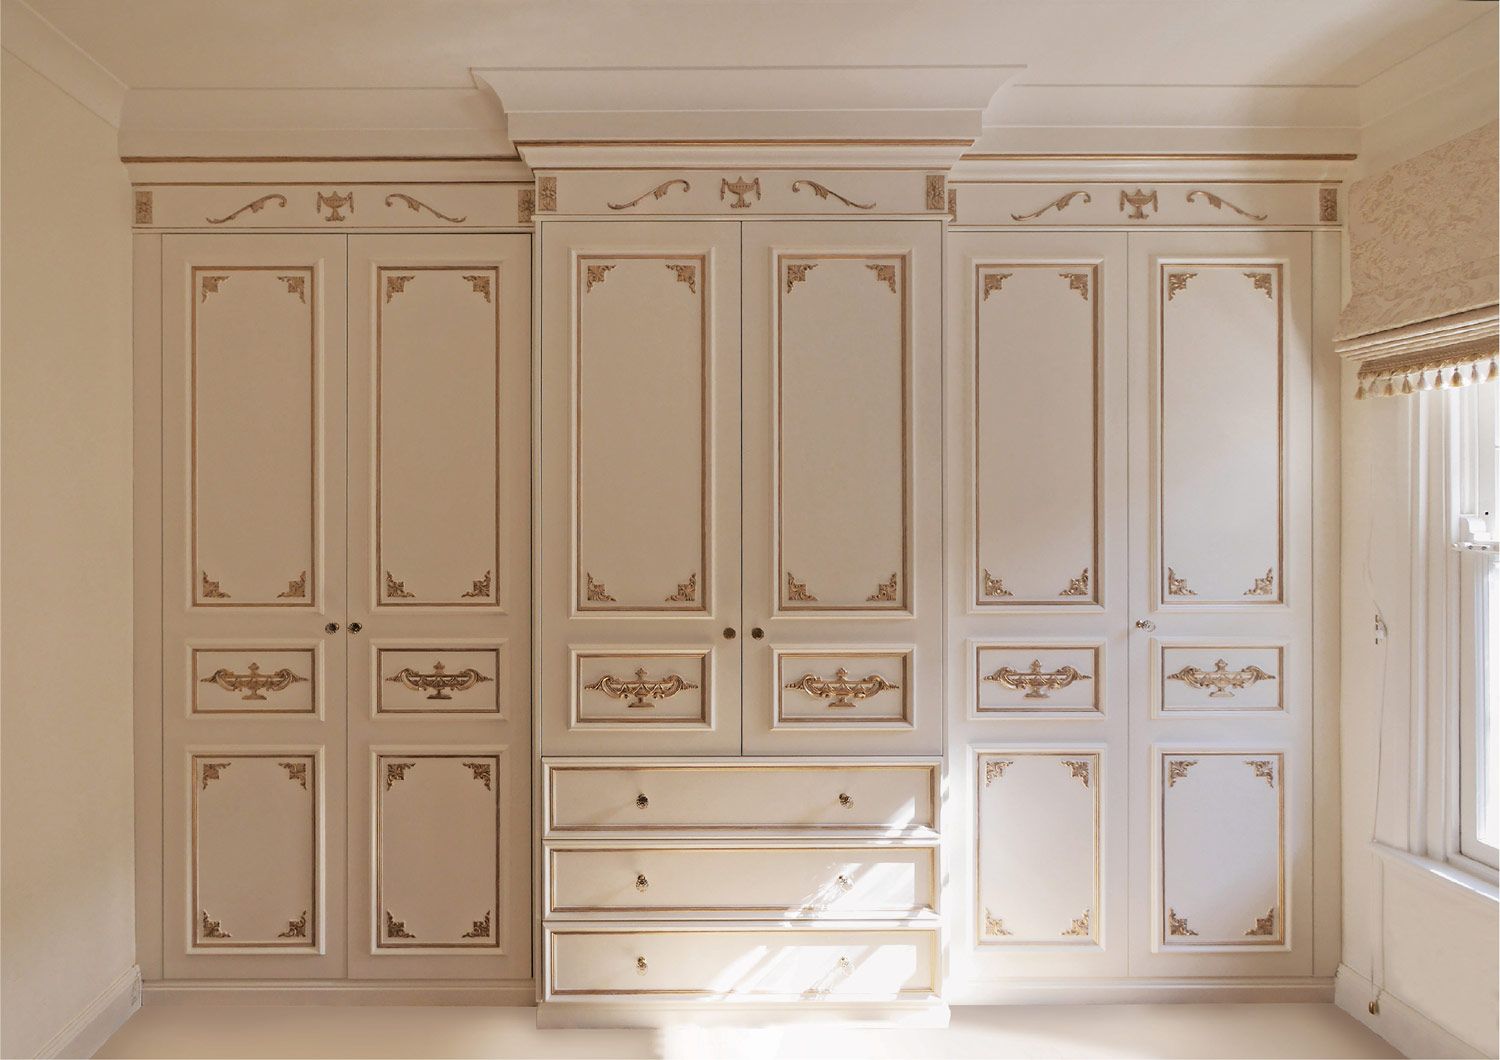 Breathtaking French Wardrobe Designs | Custom Made | Luxury Finishes With Regard To French Style Fitted Wardrobes (View 2 of 15)